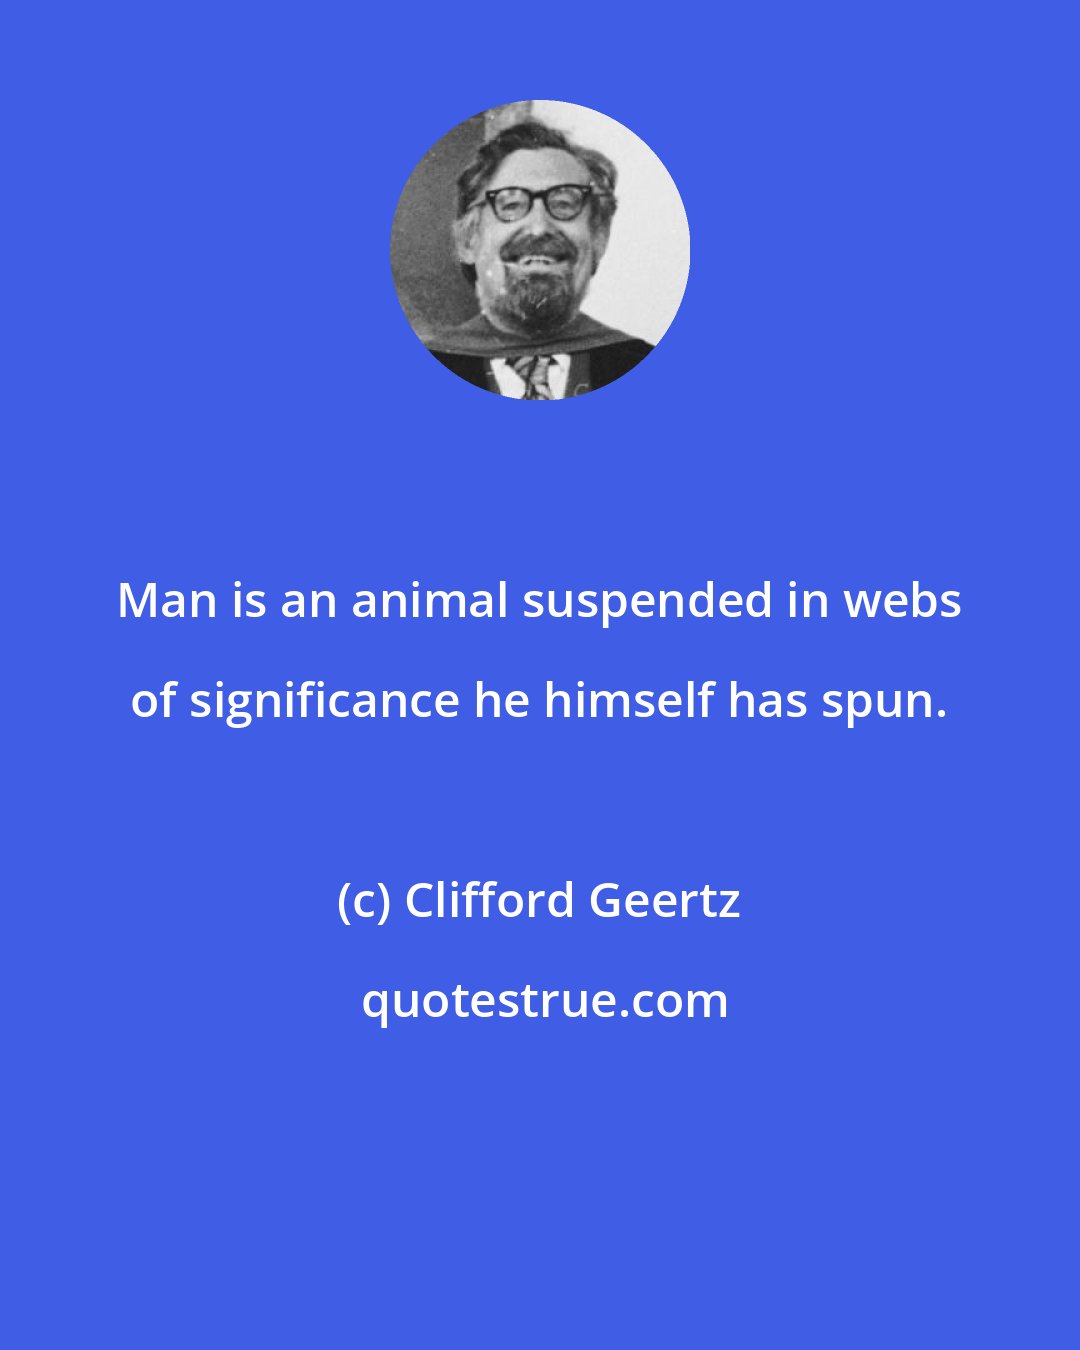 Clifford Geertz: Man is an animal suspended in webs of significance he himself has spun.